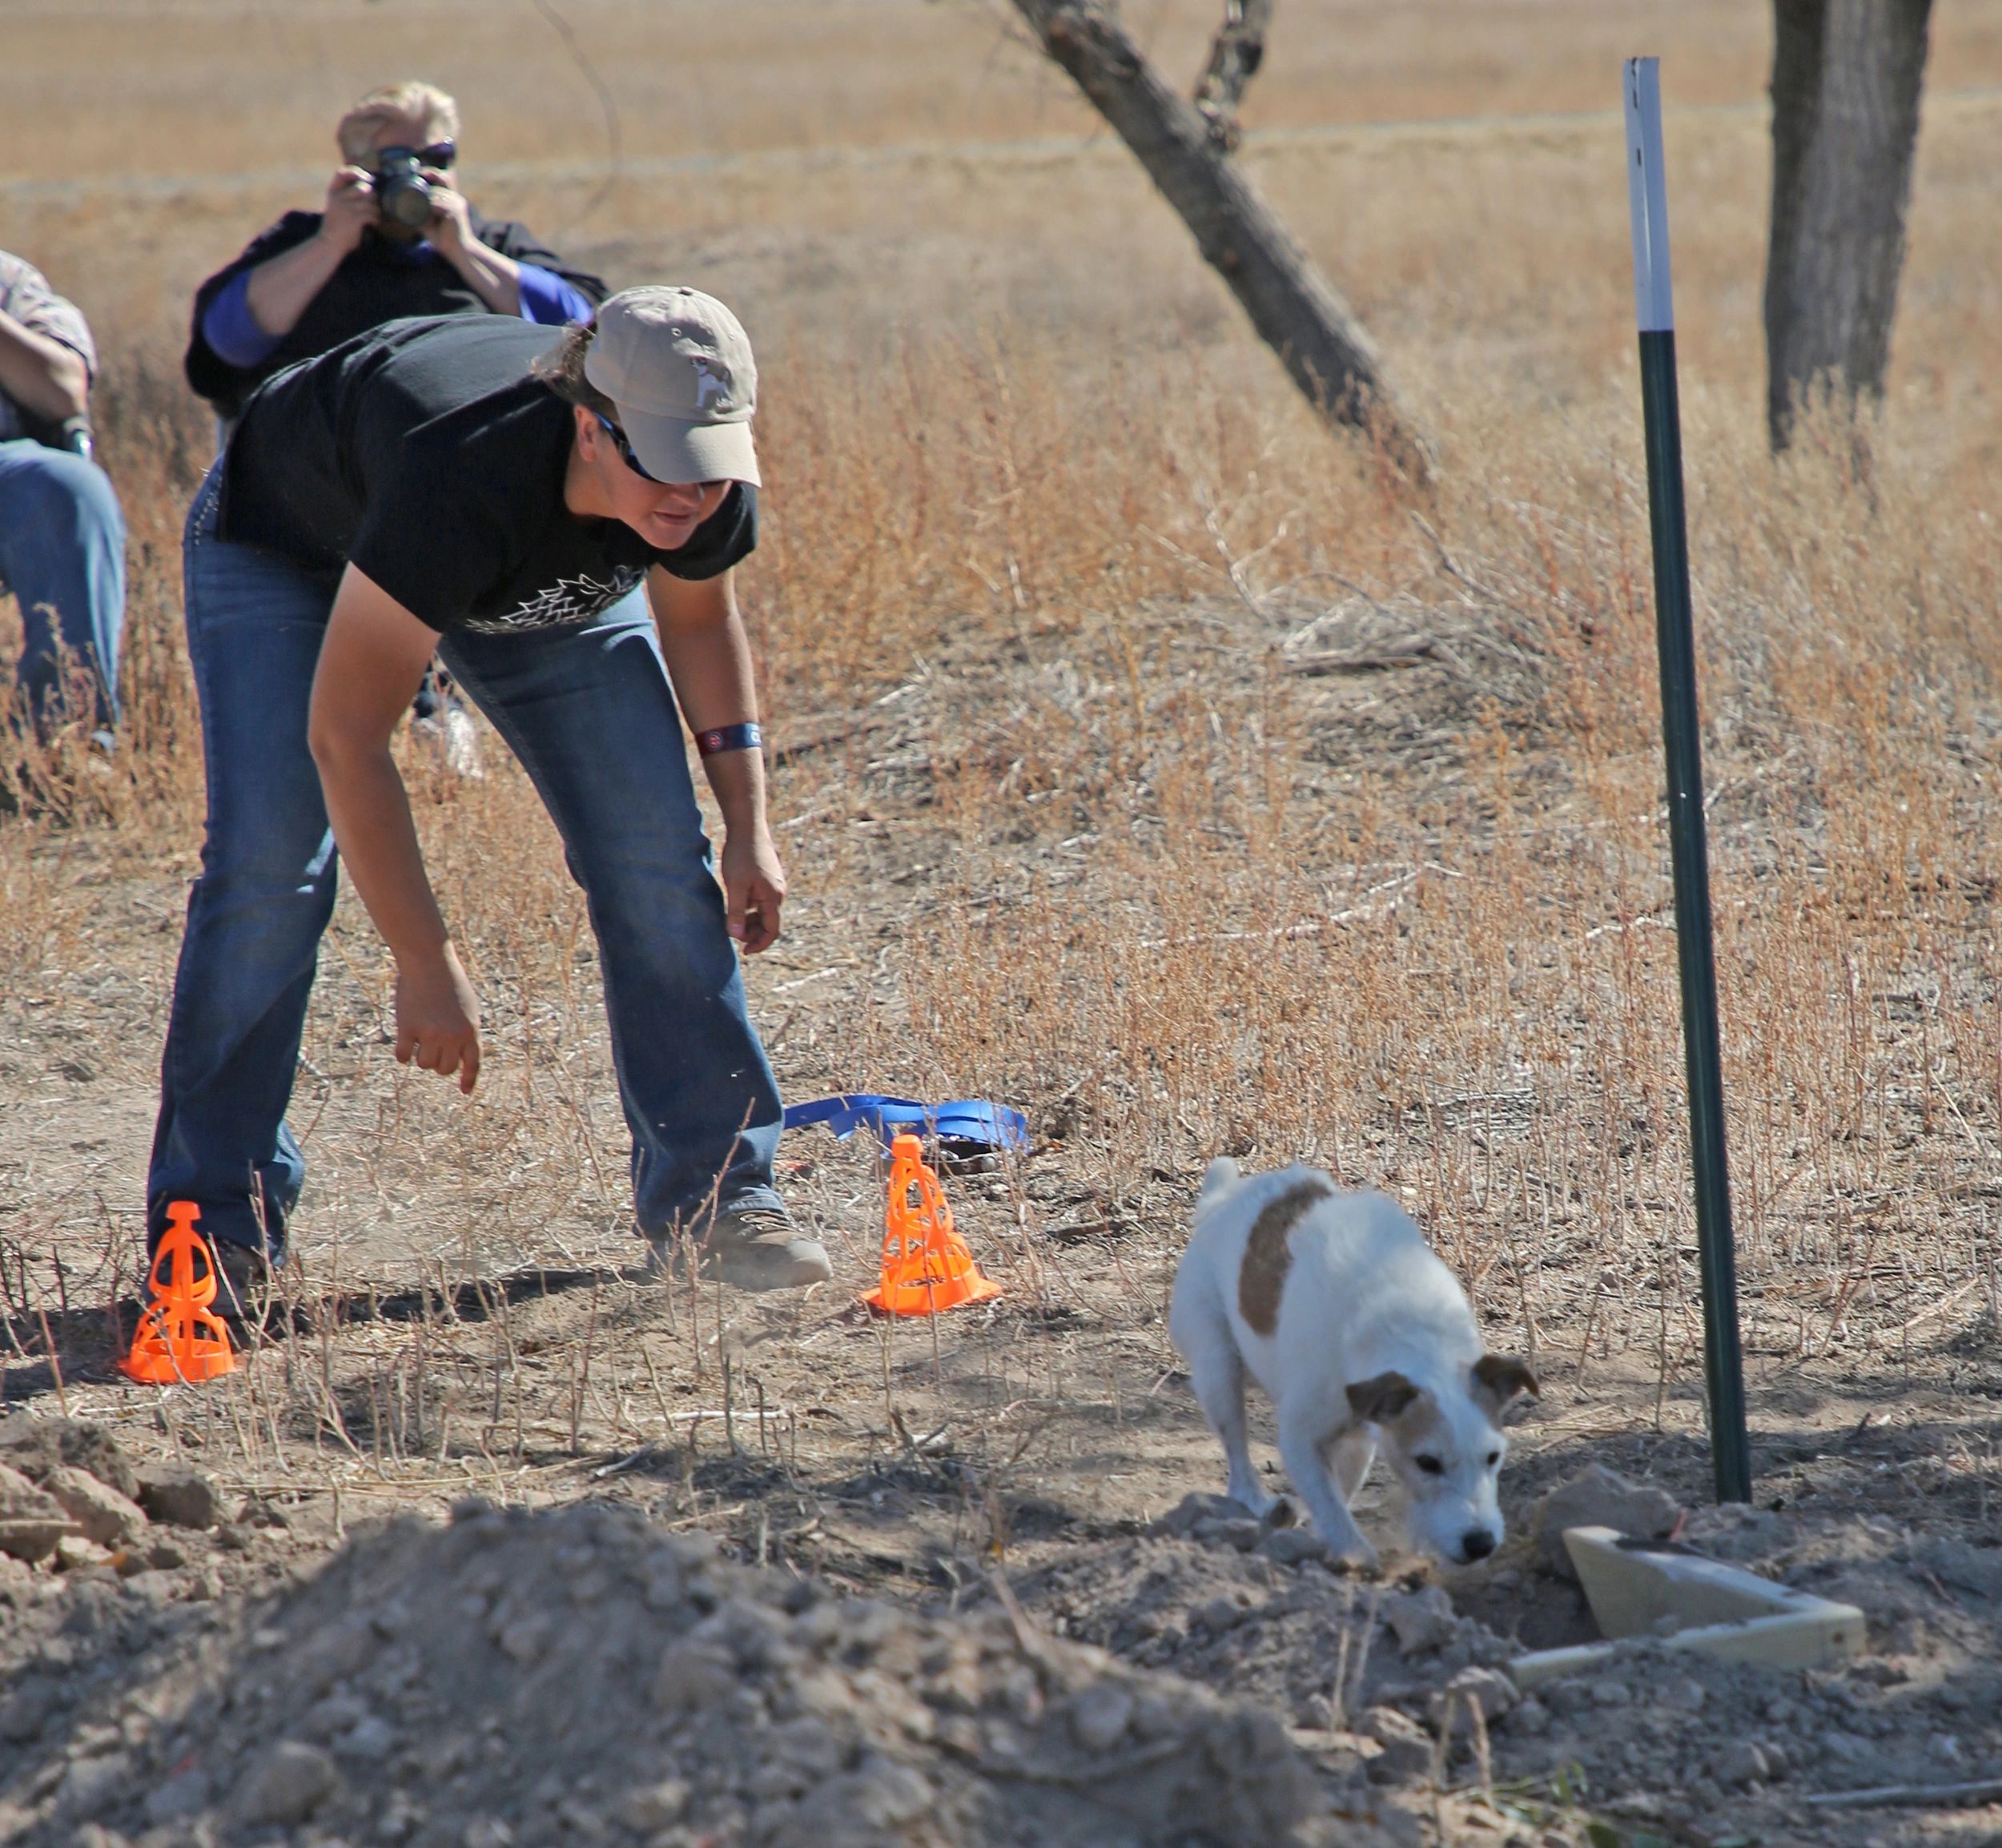 A Jack Russel Terrier entering the Junior Earthdog tunnel during a trial  at  Cottonwood, AZ.